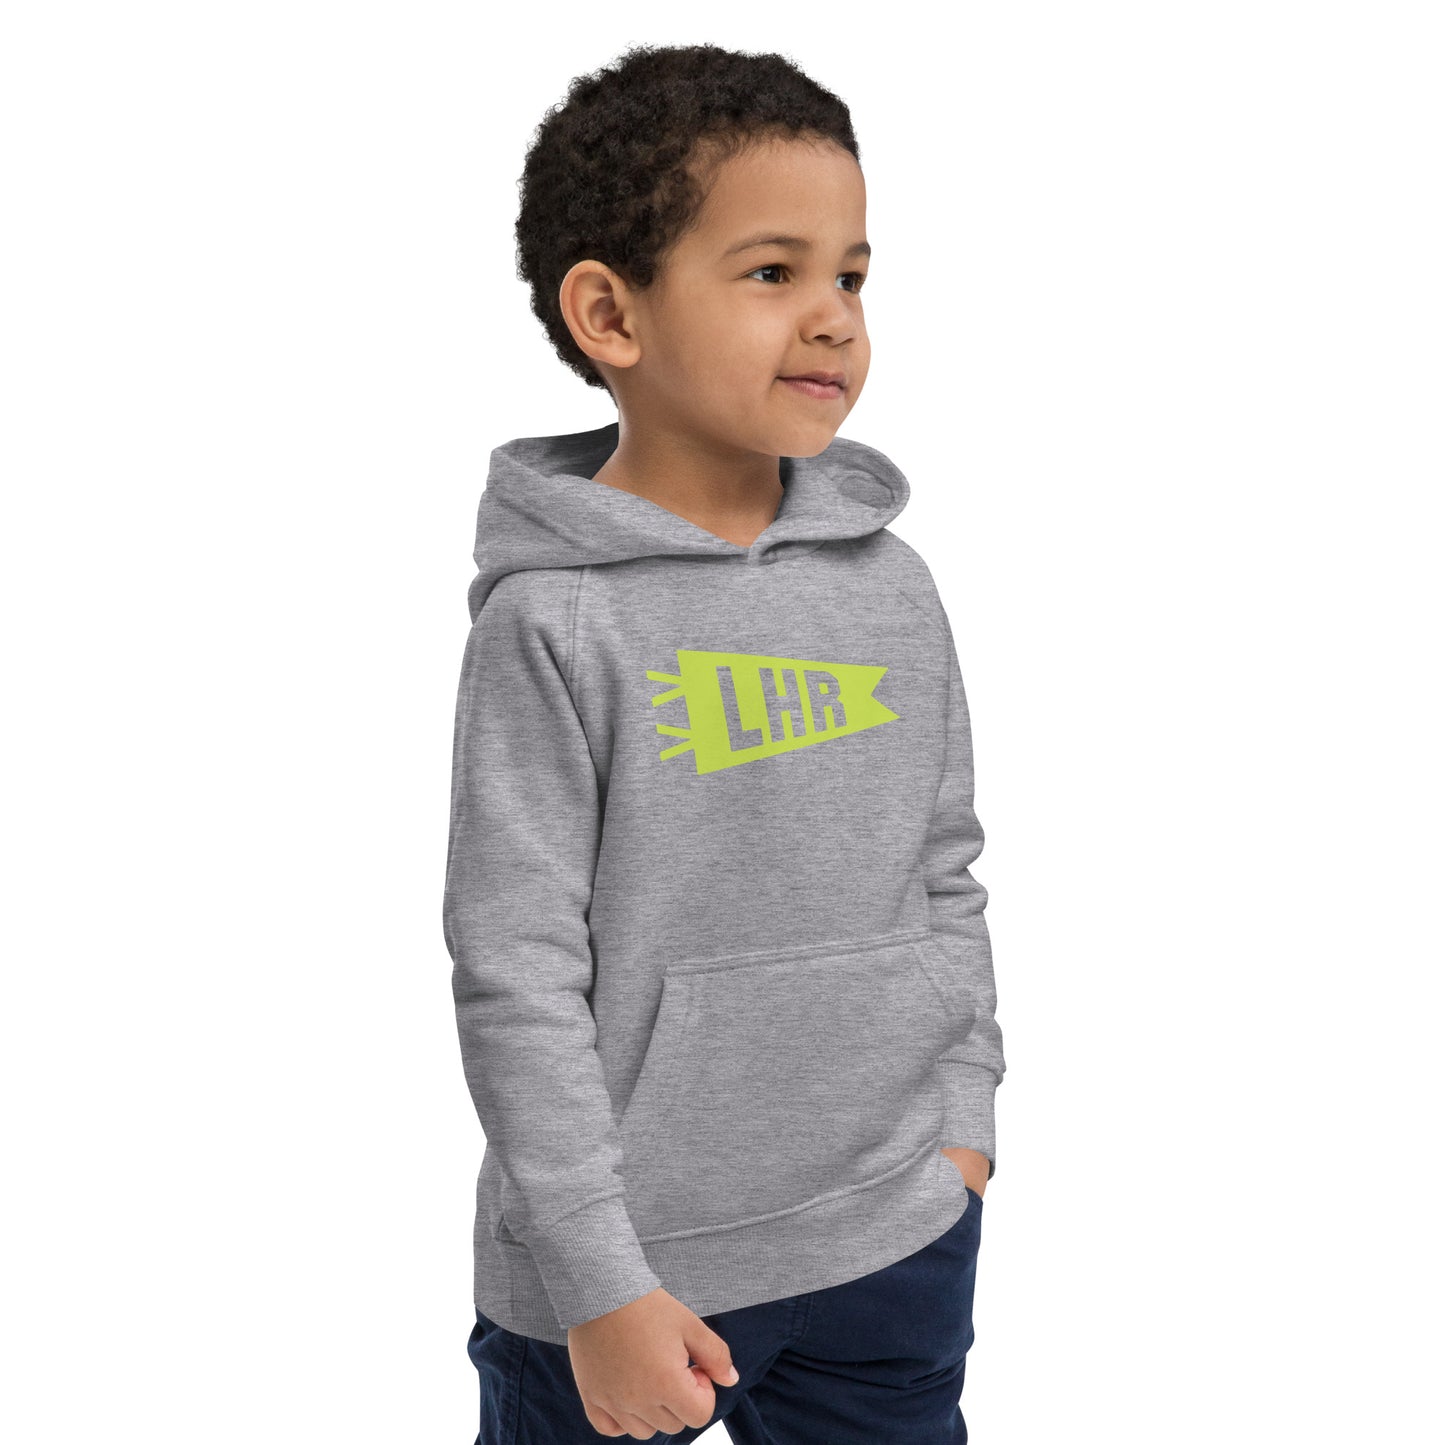 Kid's Sustainable Hoodie - Green Graphic • LHR London • YHM Designs - Image 13